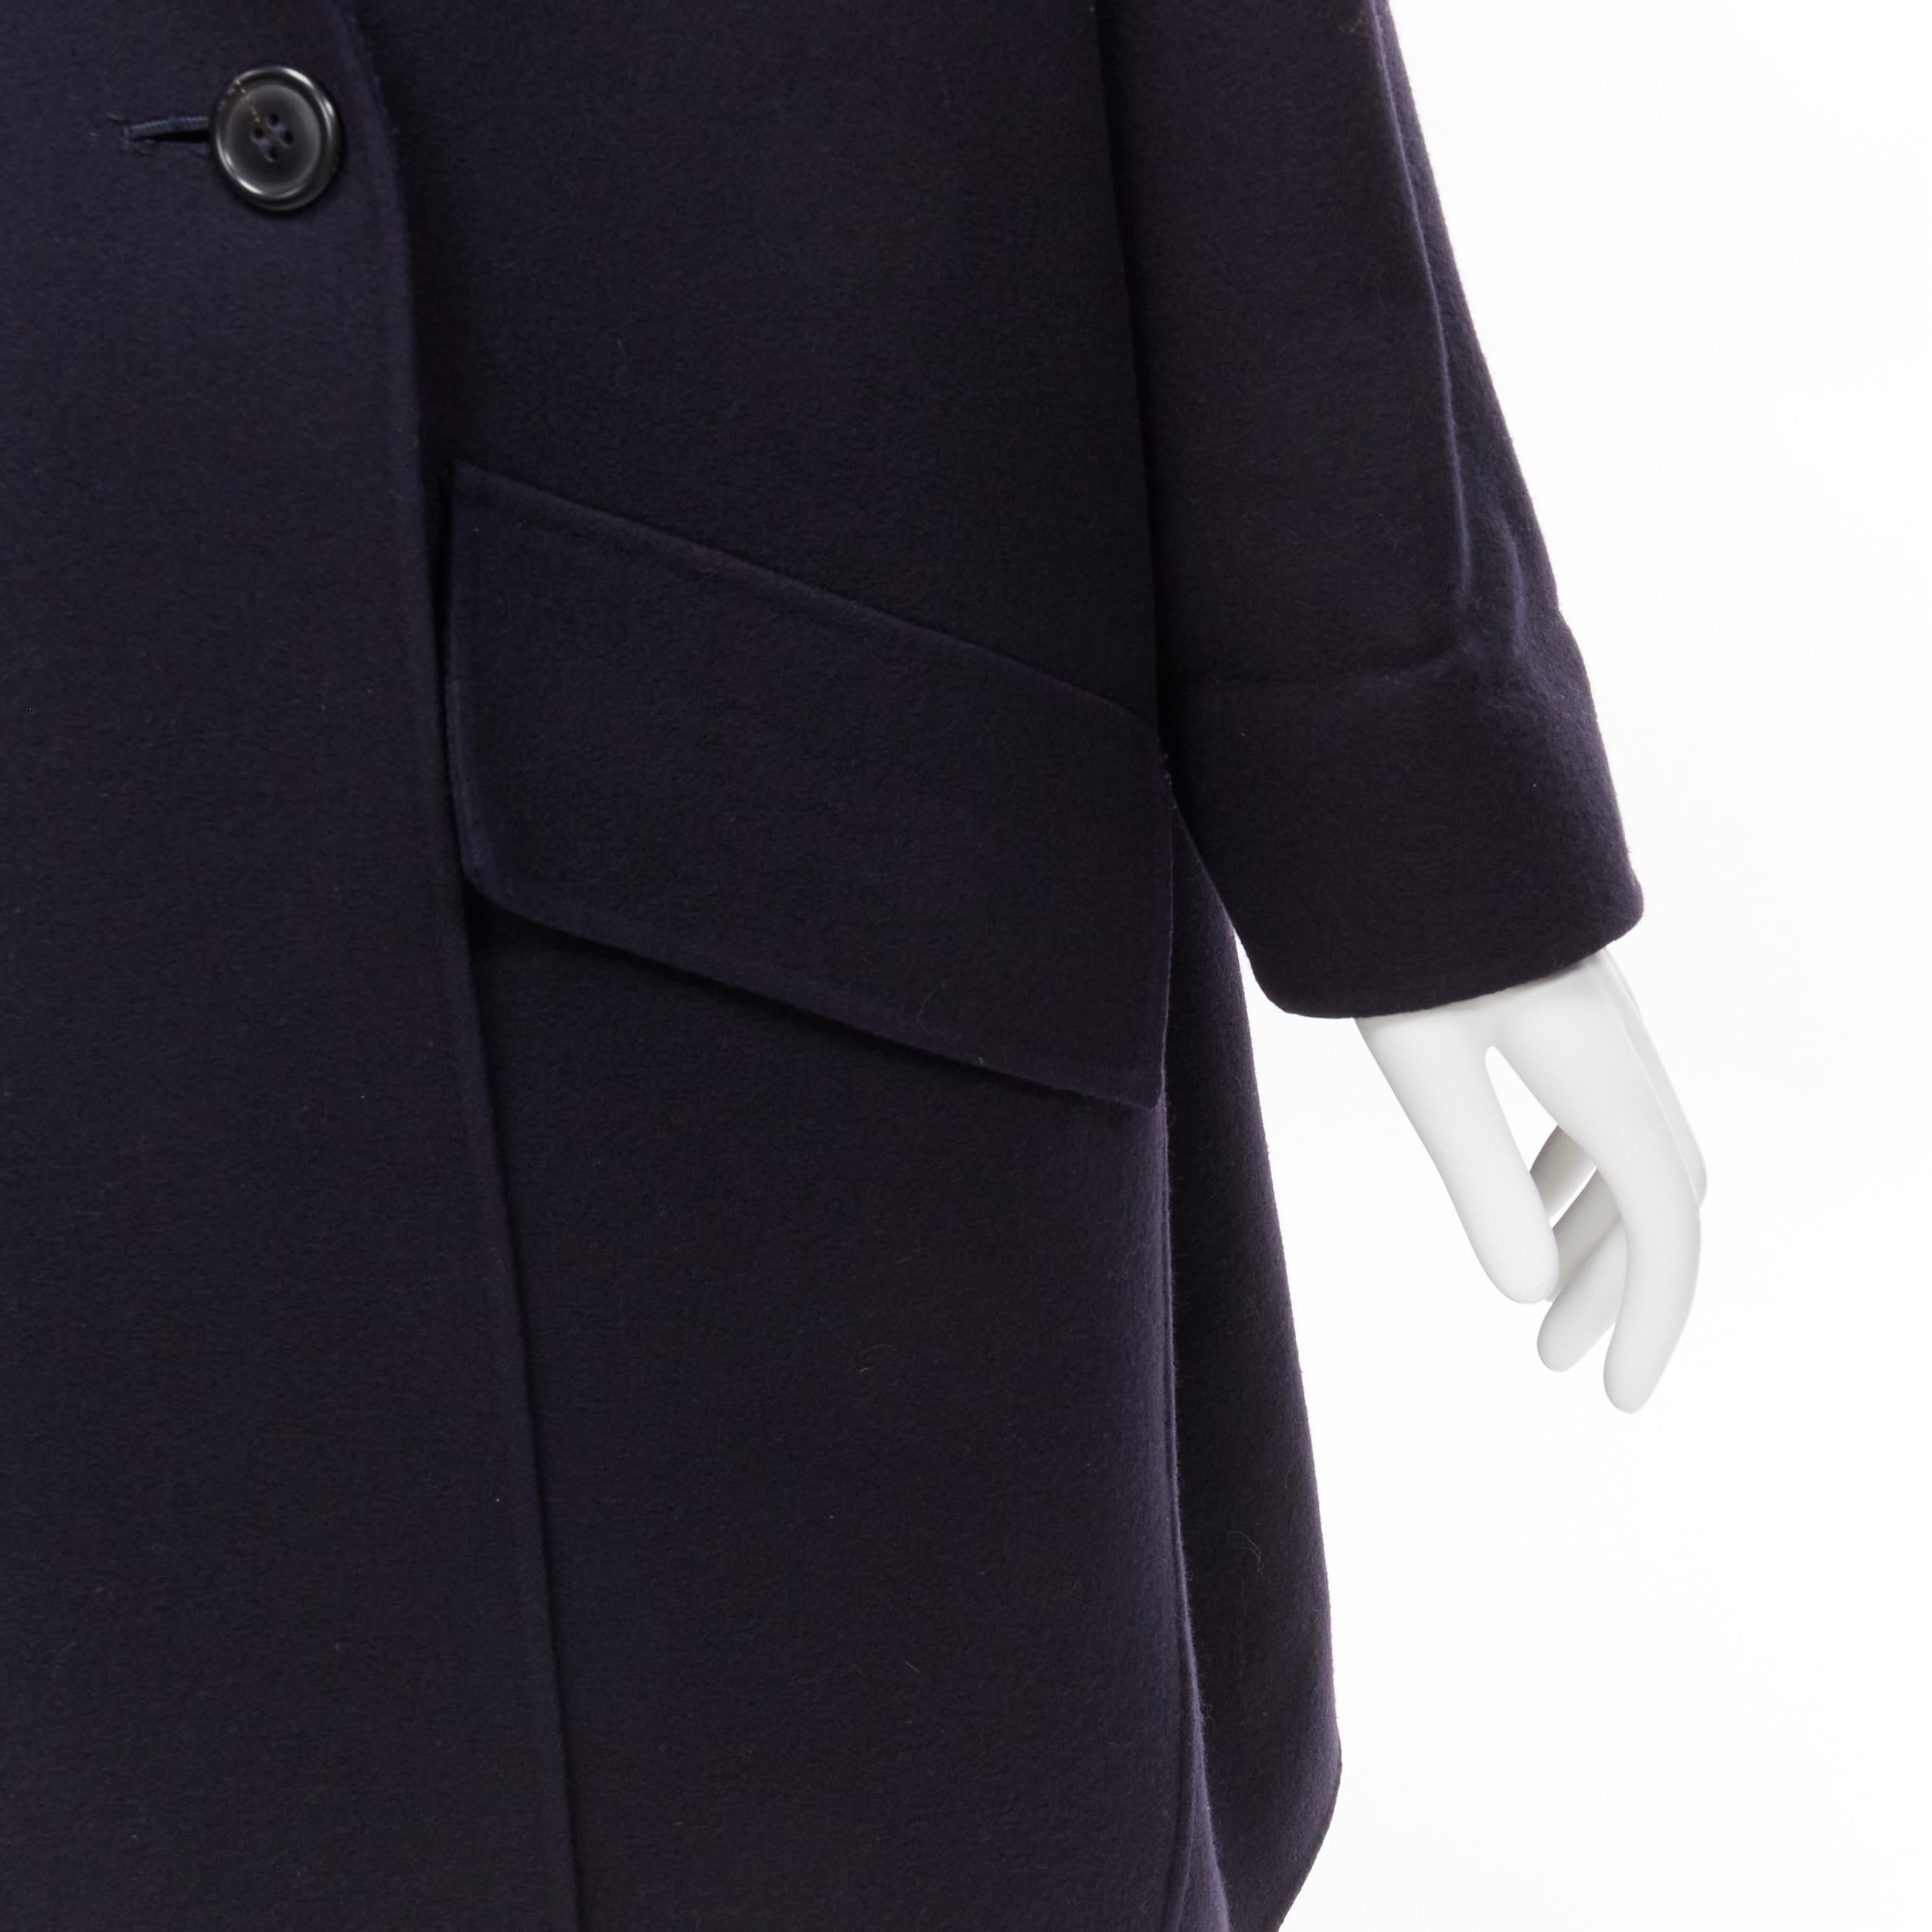 ISSEY MIYAKE Vintage navy blue double breasted wide cut cocoon coat L
Reference: TGAS/D00261
Brand: Issey Miyake
Material: Feels like wool
Color: Navy
Pattern: Solid
Closure: Button
Lining: Navy Fabric
Made in: Japan

CONDITION:
Condition: